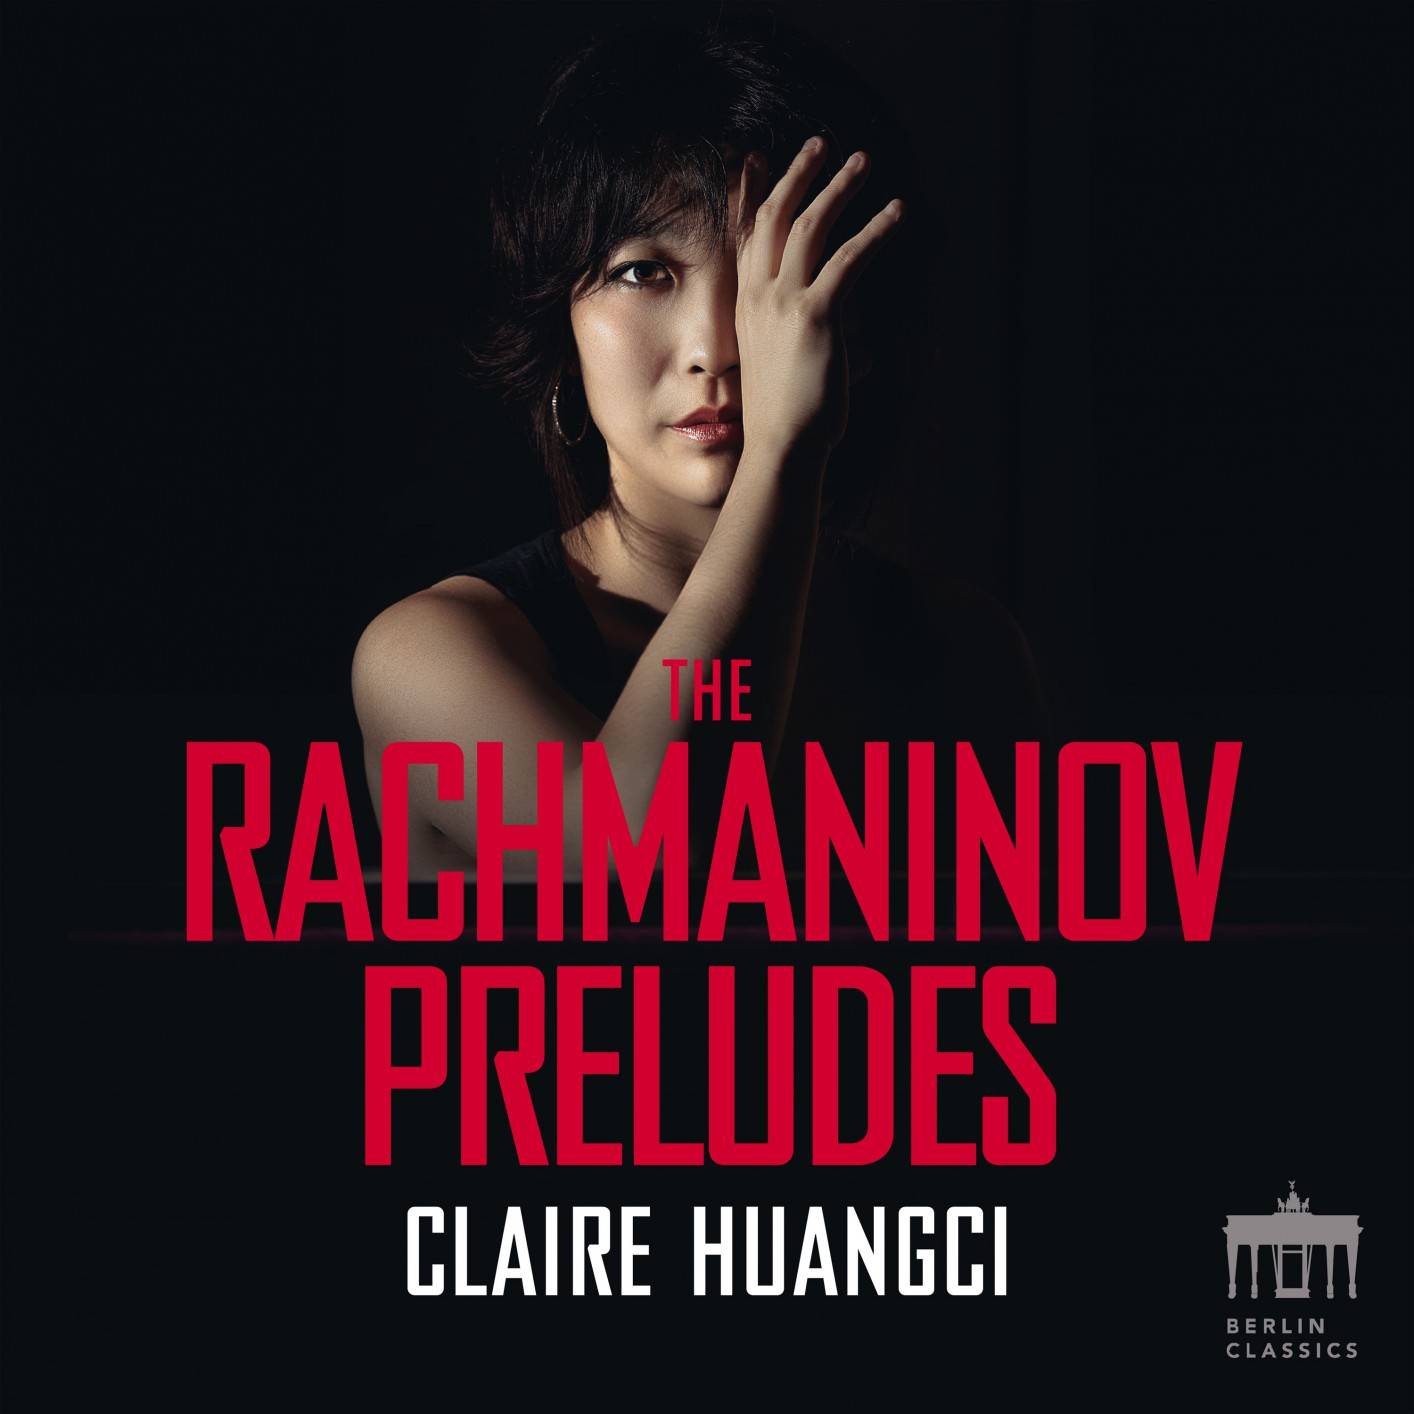 Claire Huangci - Rachmaninov: The Preludes (2018) [FLAC 24bit/96kHz]